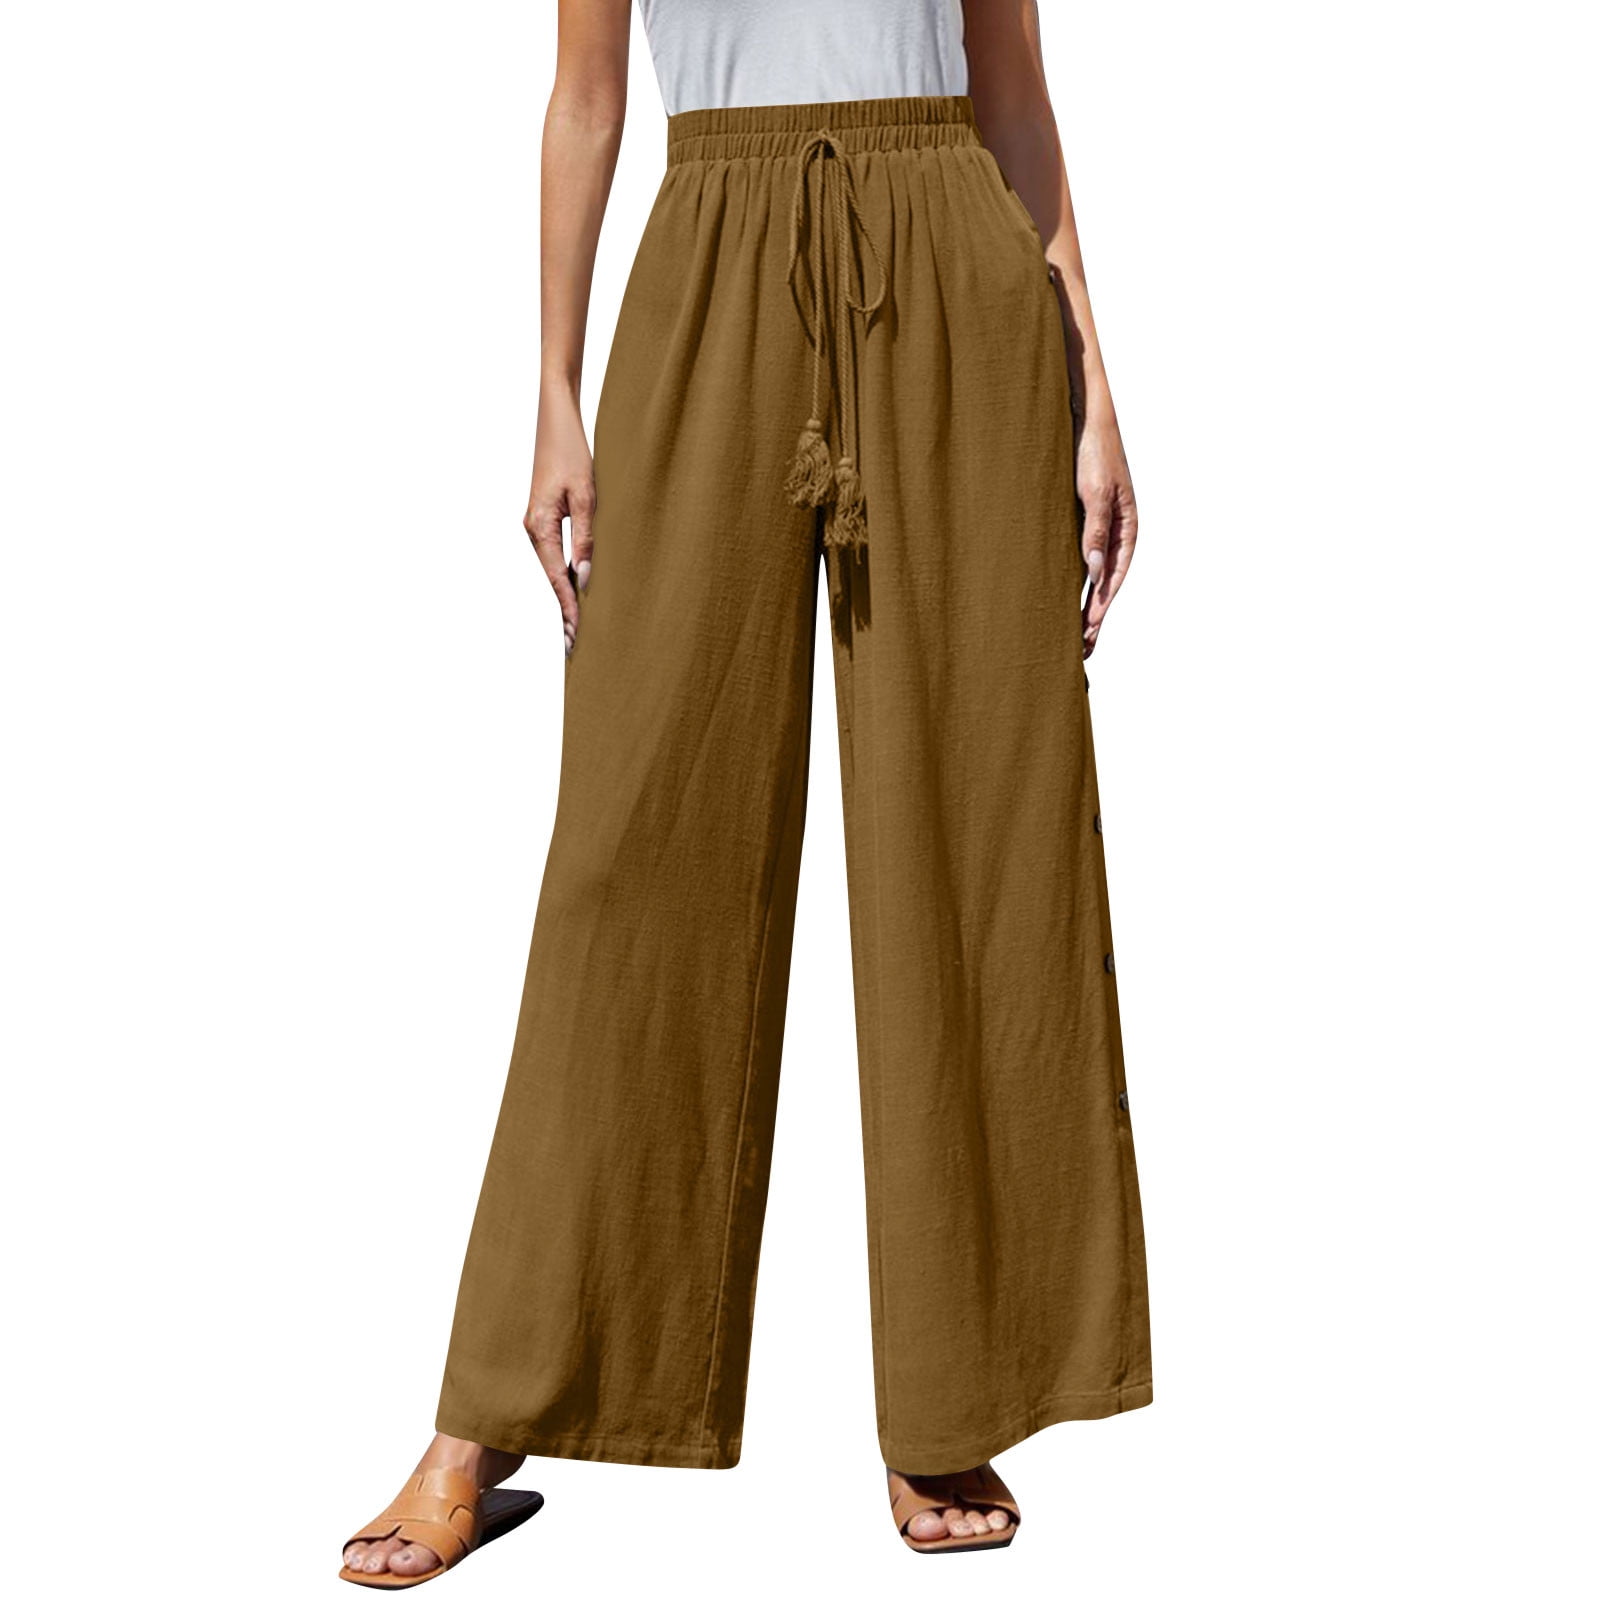  Uillui Womens Cotton Linen Striped Palazzo Pants High Waisted  Drawstring Casual Loose Cropped Pant Wide Leg Long Lounge Pant Beige :  Clothing, Shoes & Jewelry